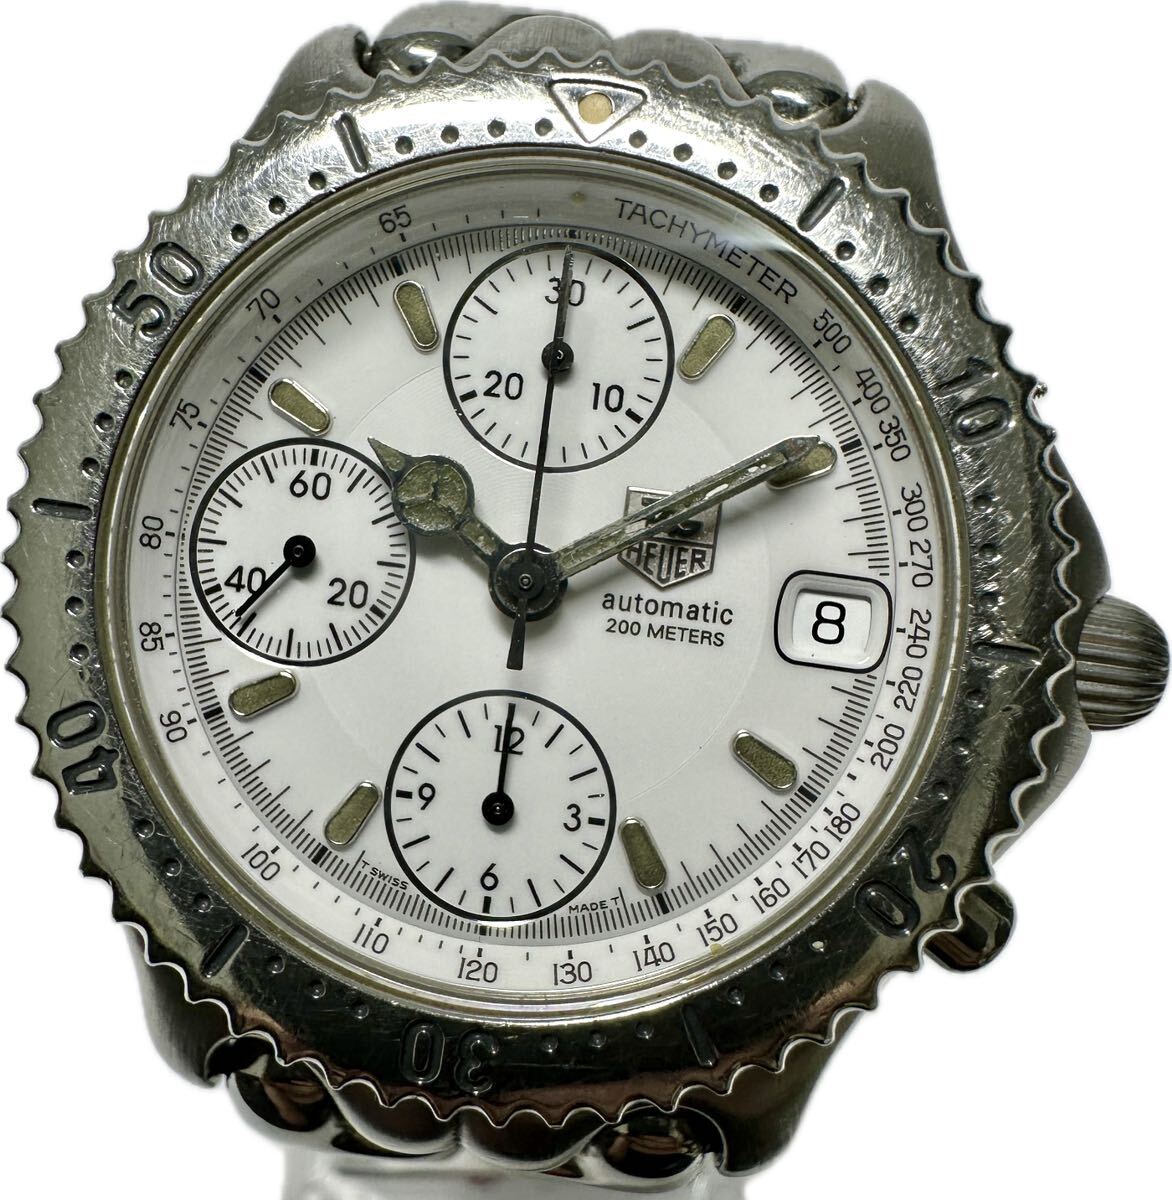 1 jpy ~ Y rare TAG Heuer cell chronograph CG2110-R0 Large size men's self-winding watch Date antique Junk clock 62240472